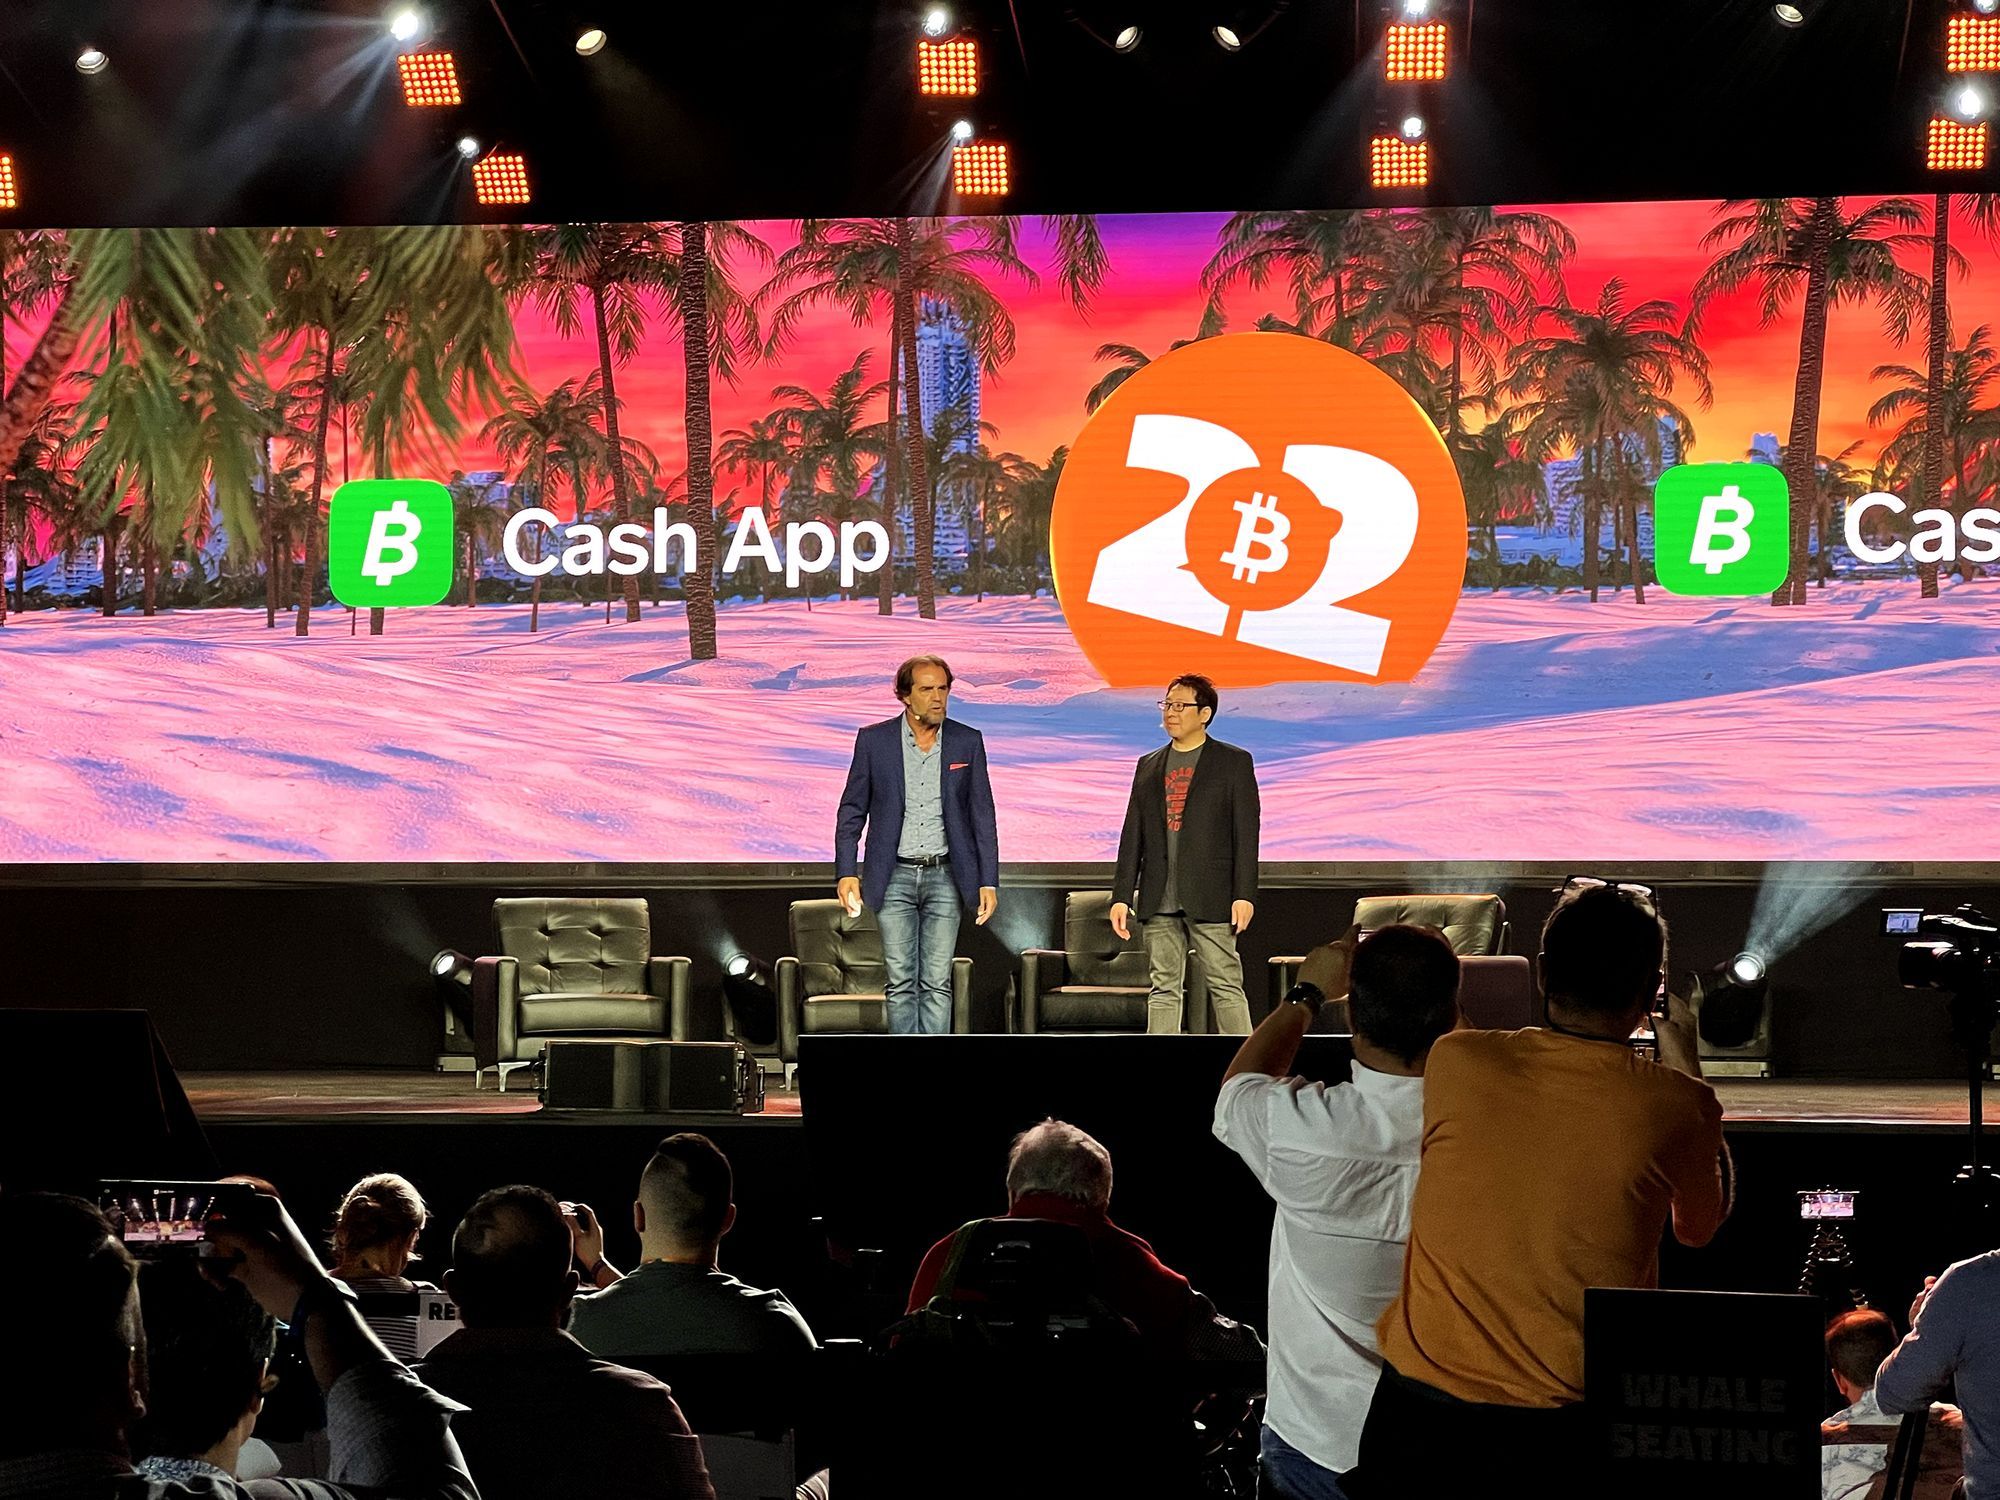 President Albuquerque and Samson Mow on stage at Bitcoin 2022